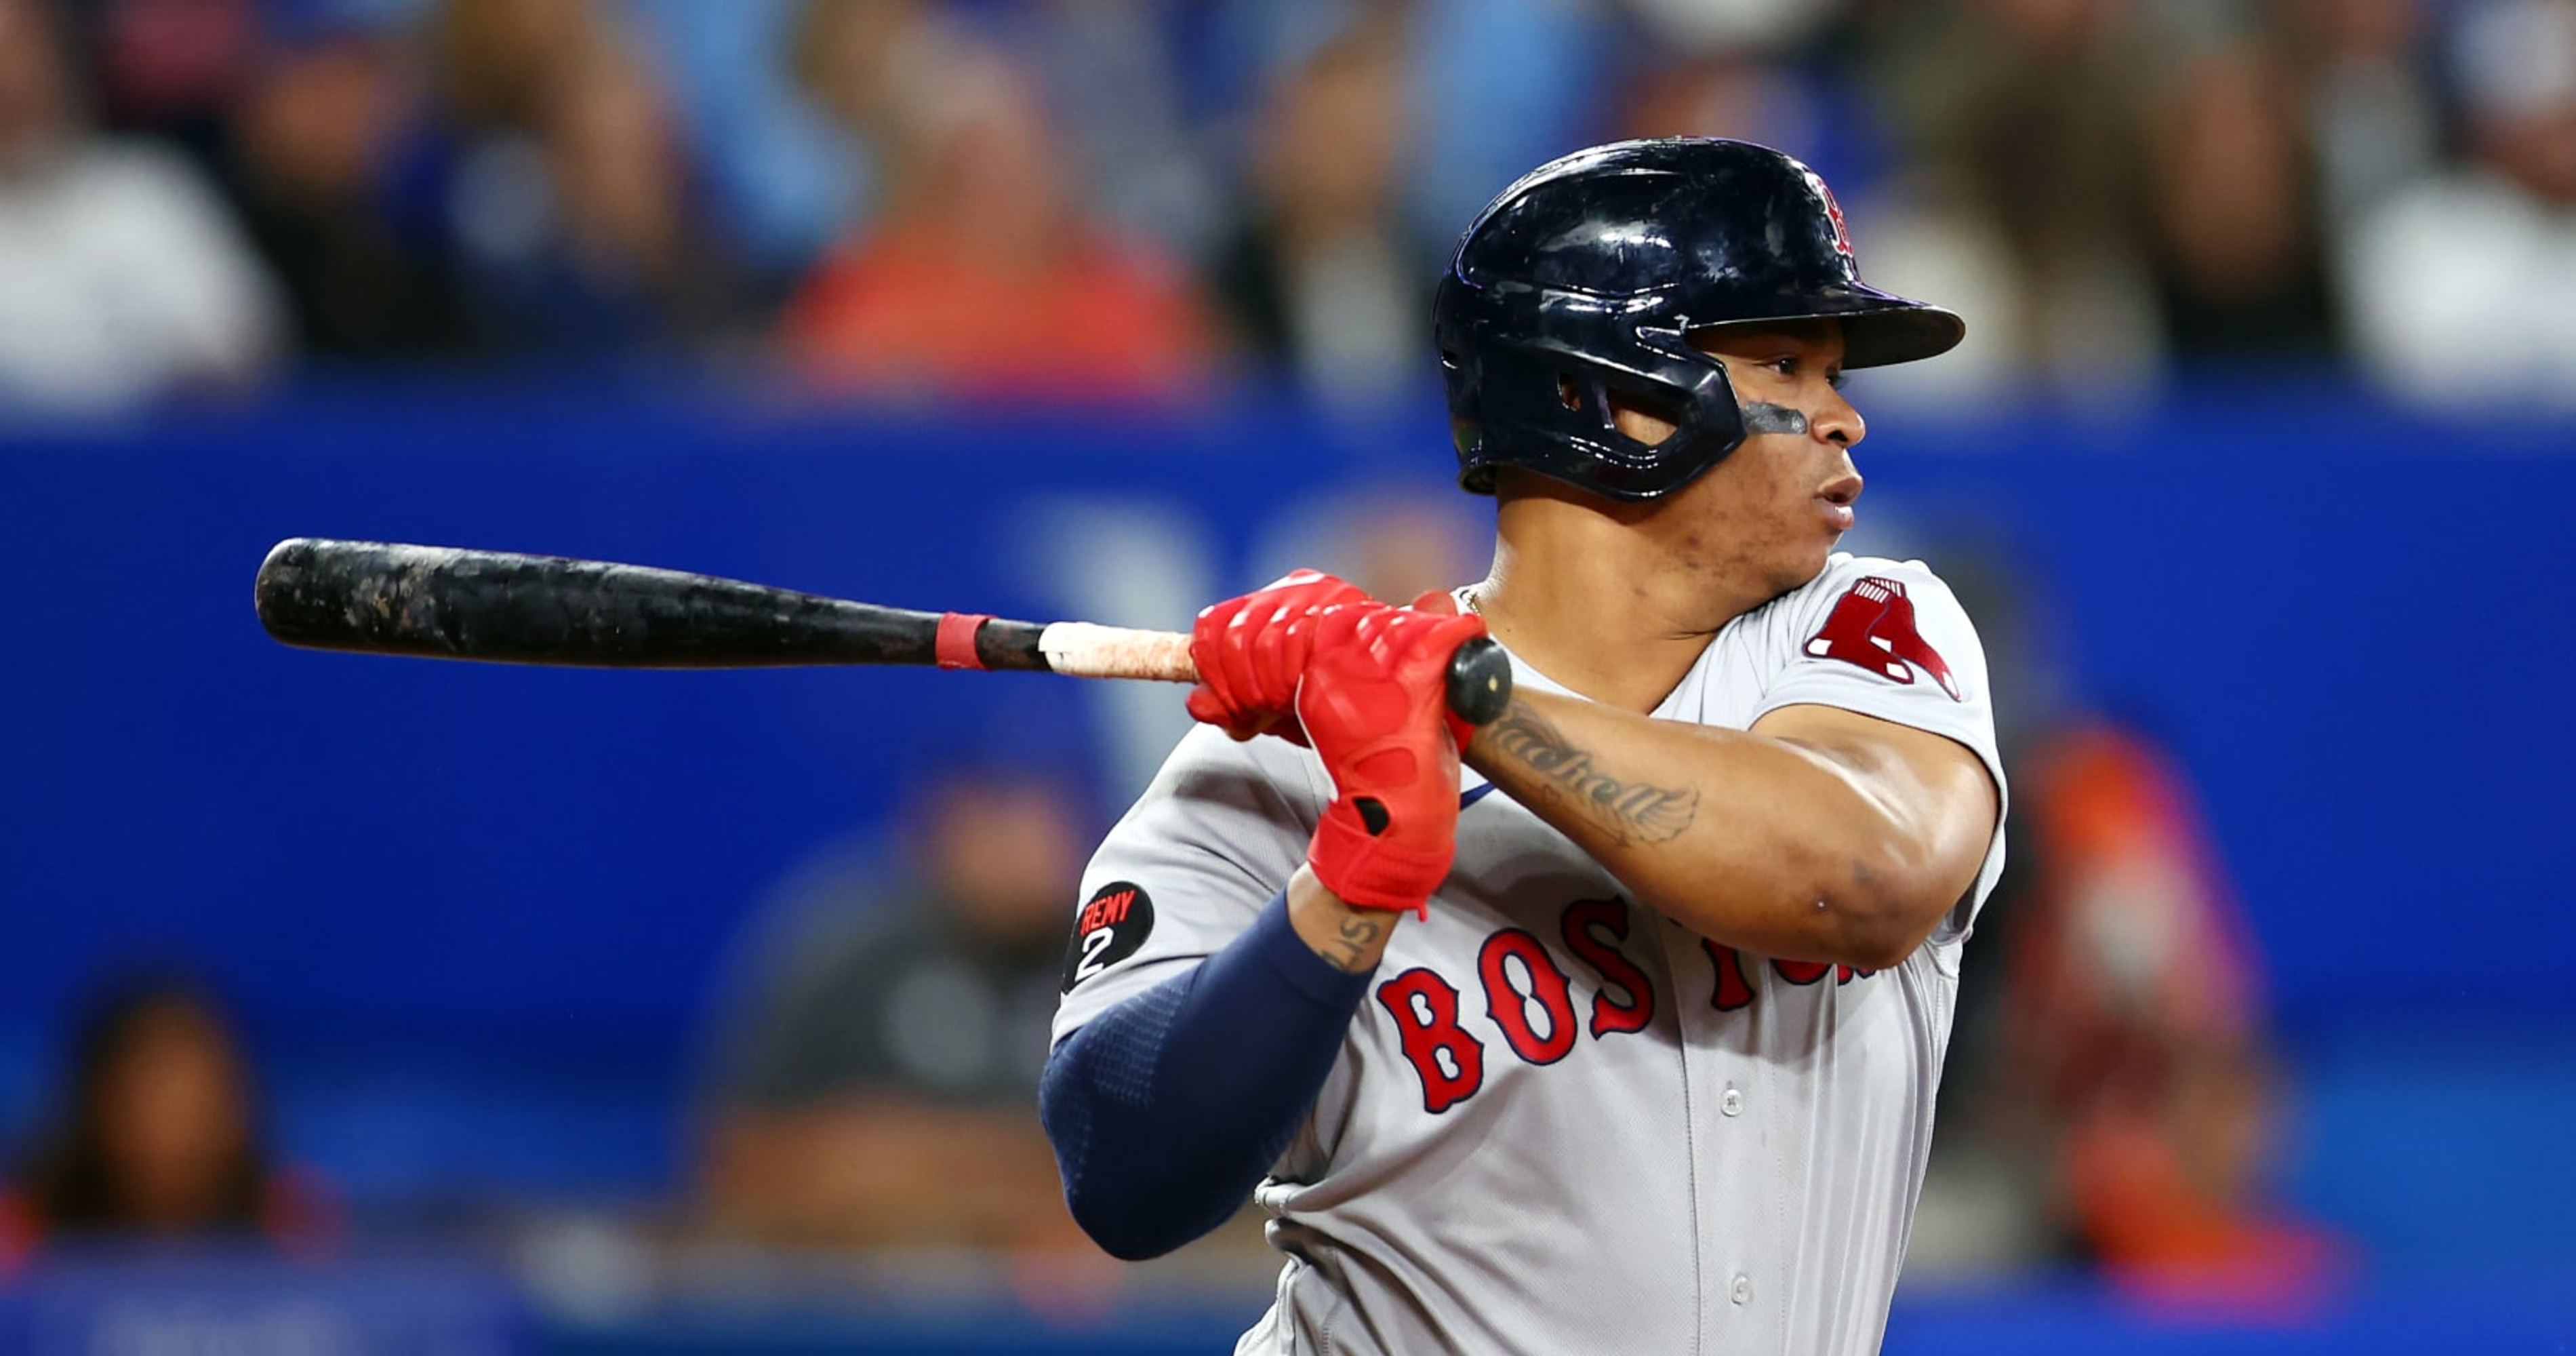 Red Sox Rumors: Rafael Devers Contract Talks Ongoing, Gap Remains 'Large'